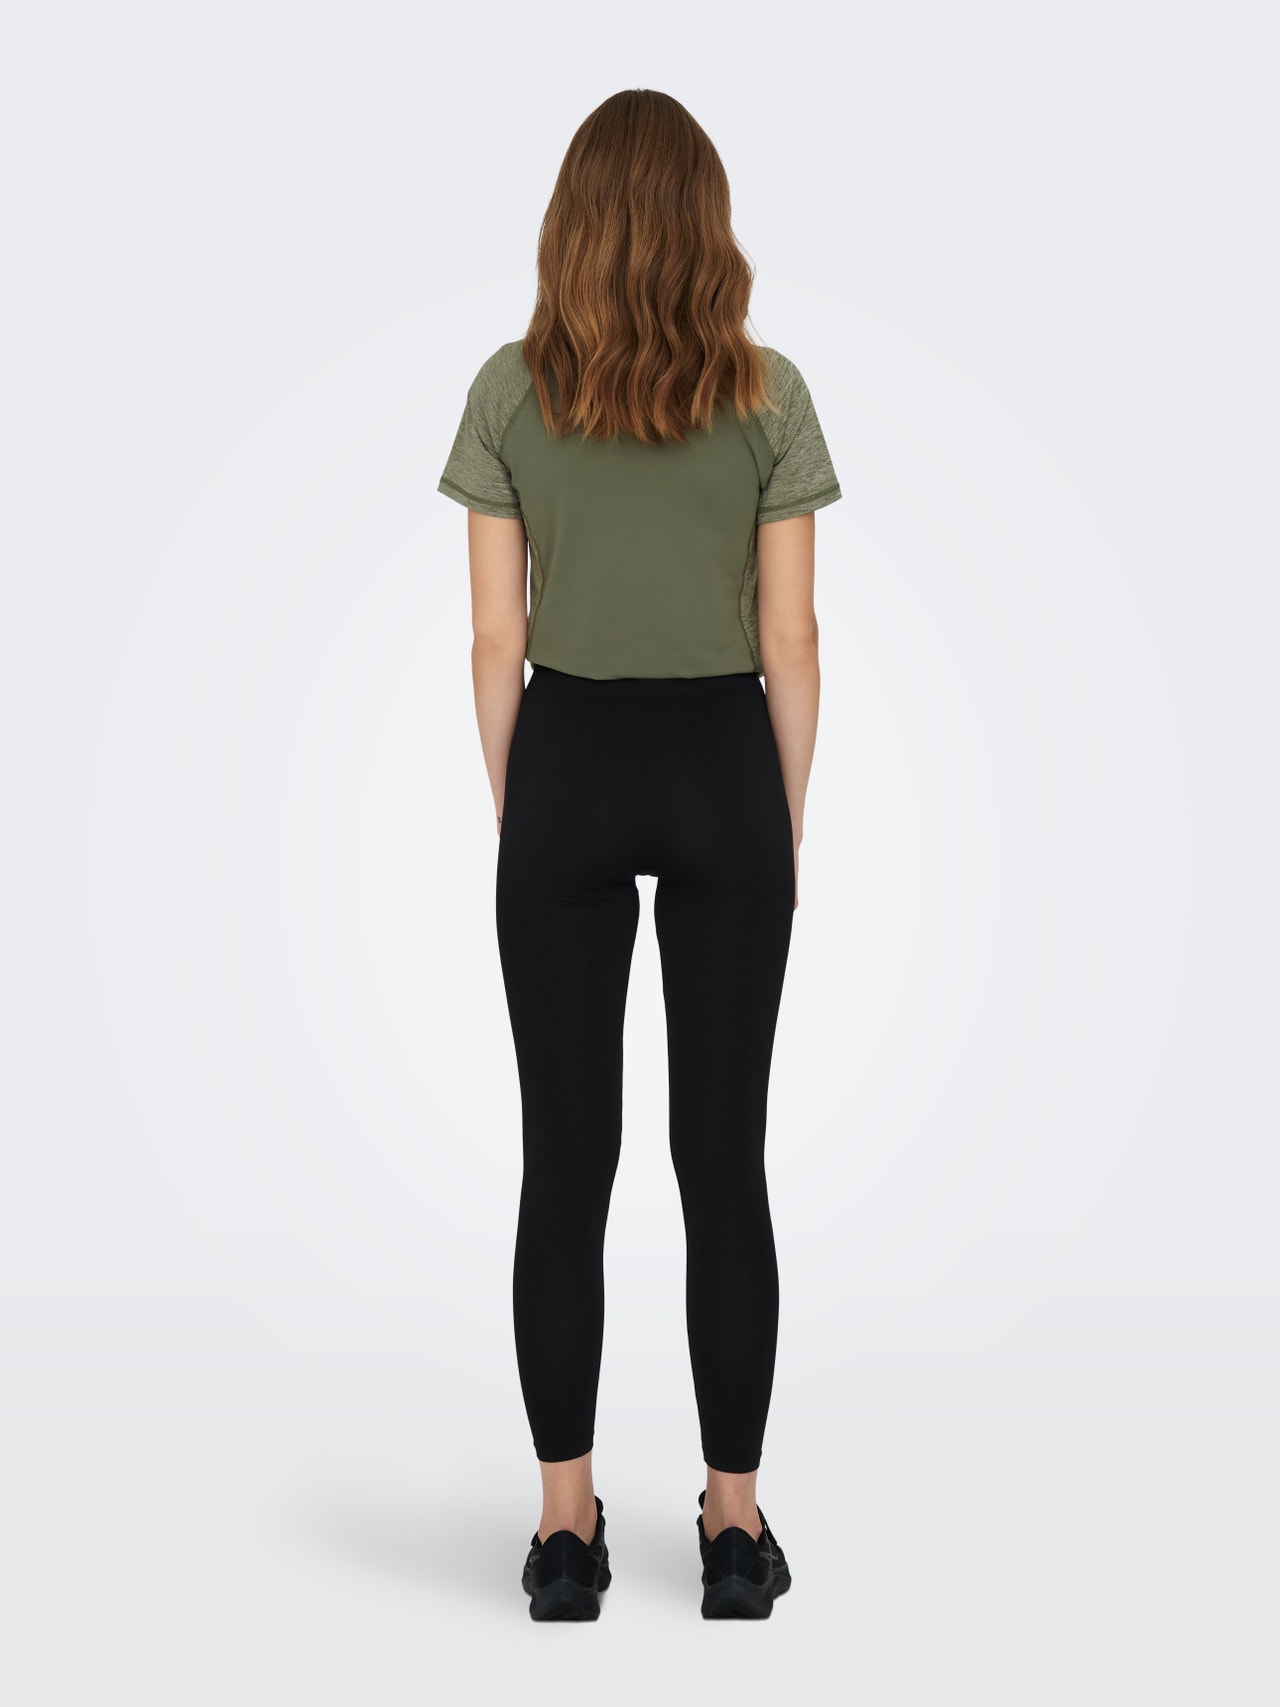 ONLY Tight Fit High waist Leggings -Black - 15296630